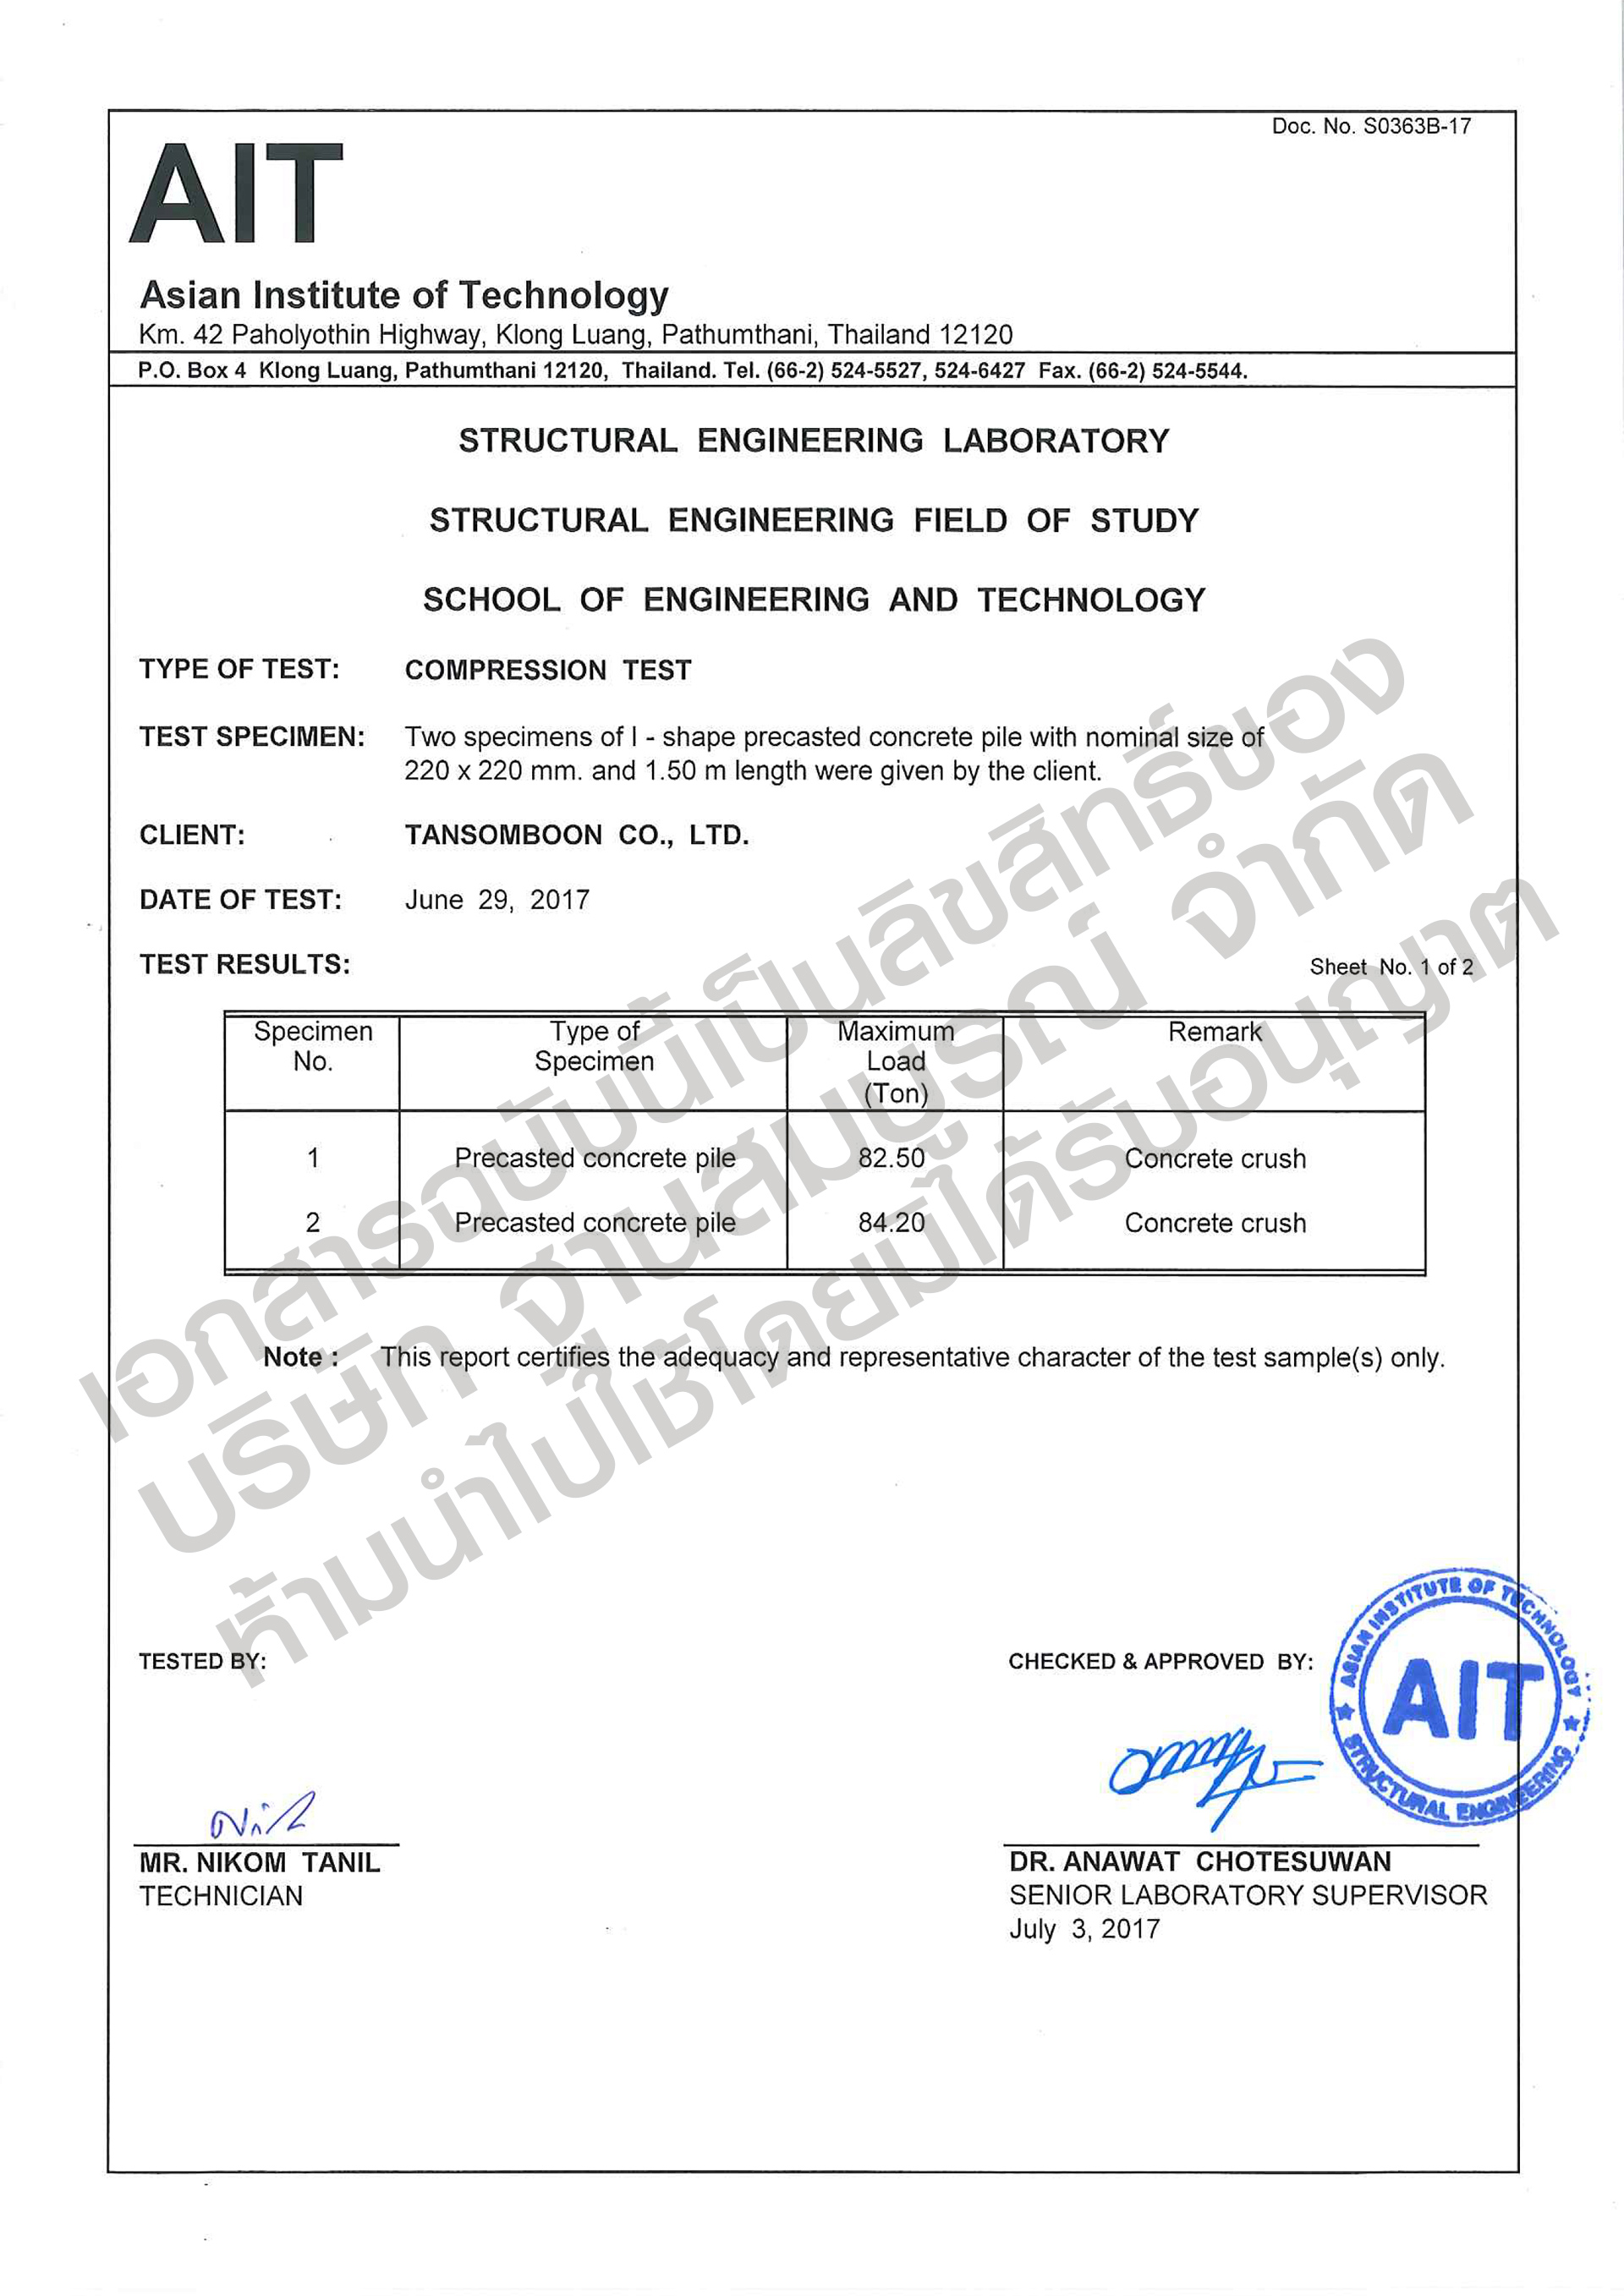 certificate tansomboon AIT 2